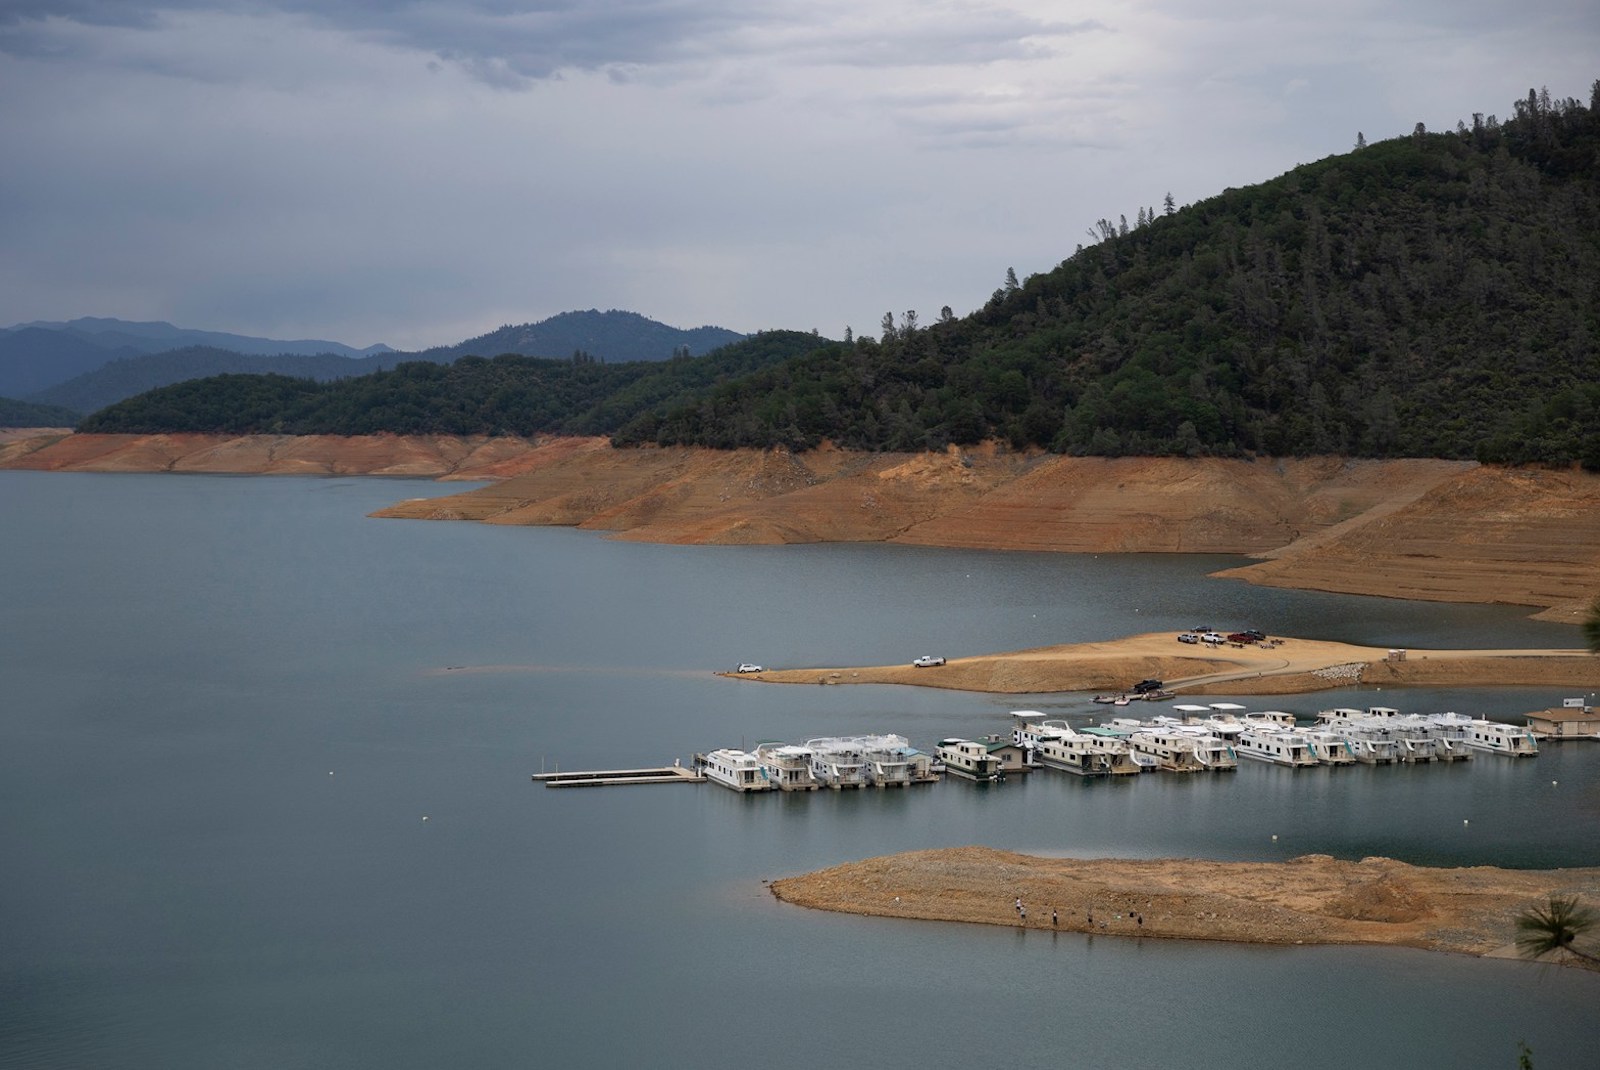 Low water levels at Shasta Lake on April 25, 2022.